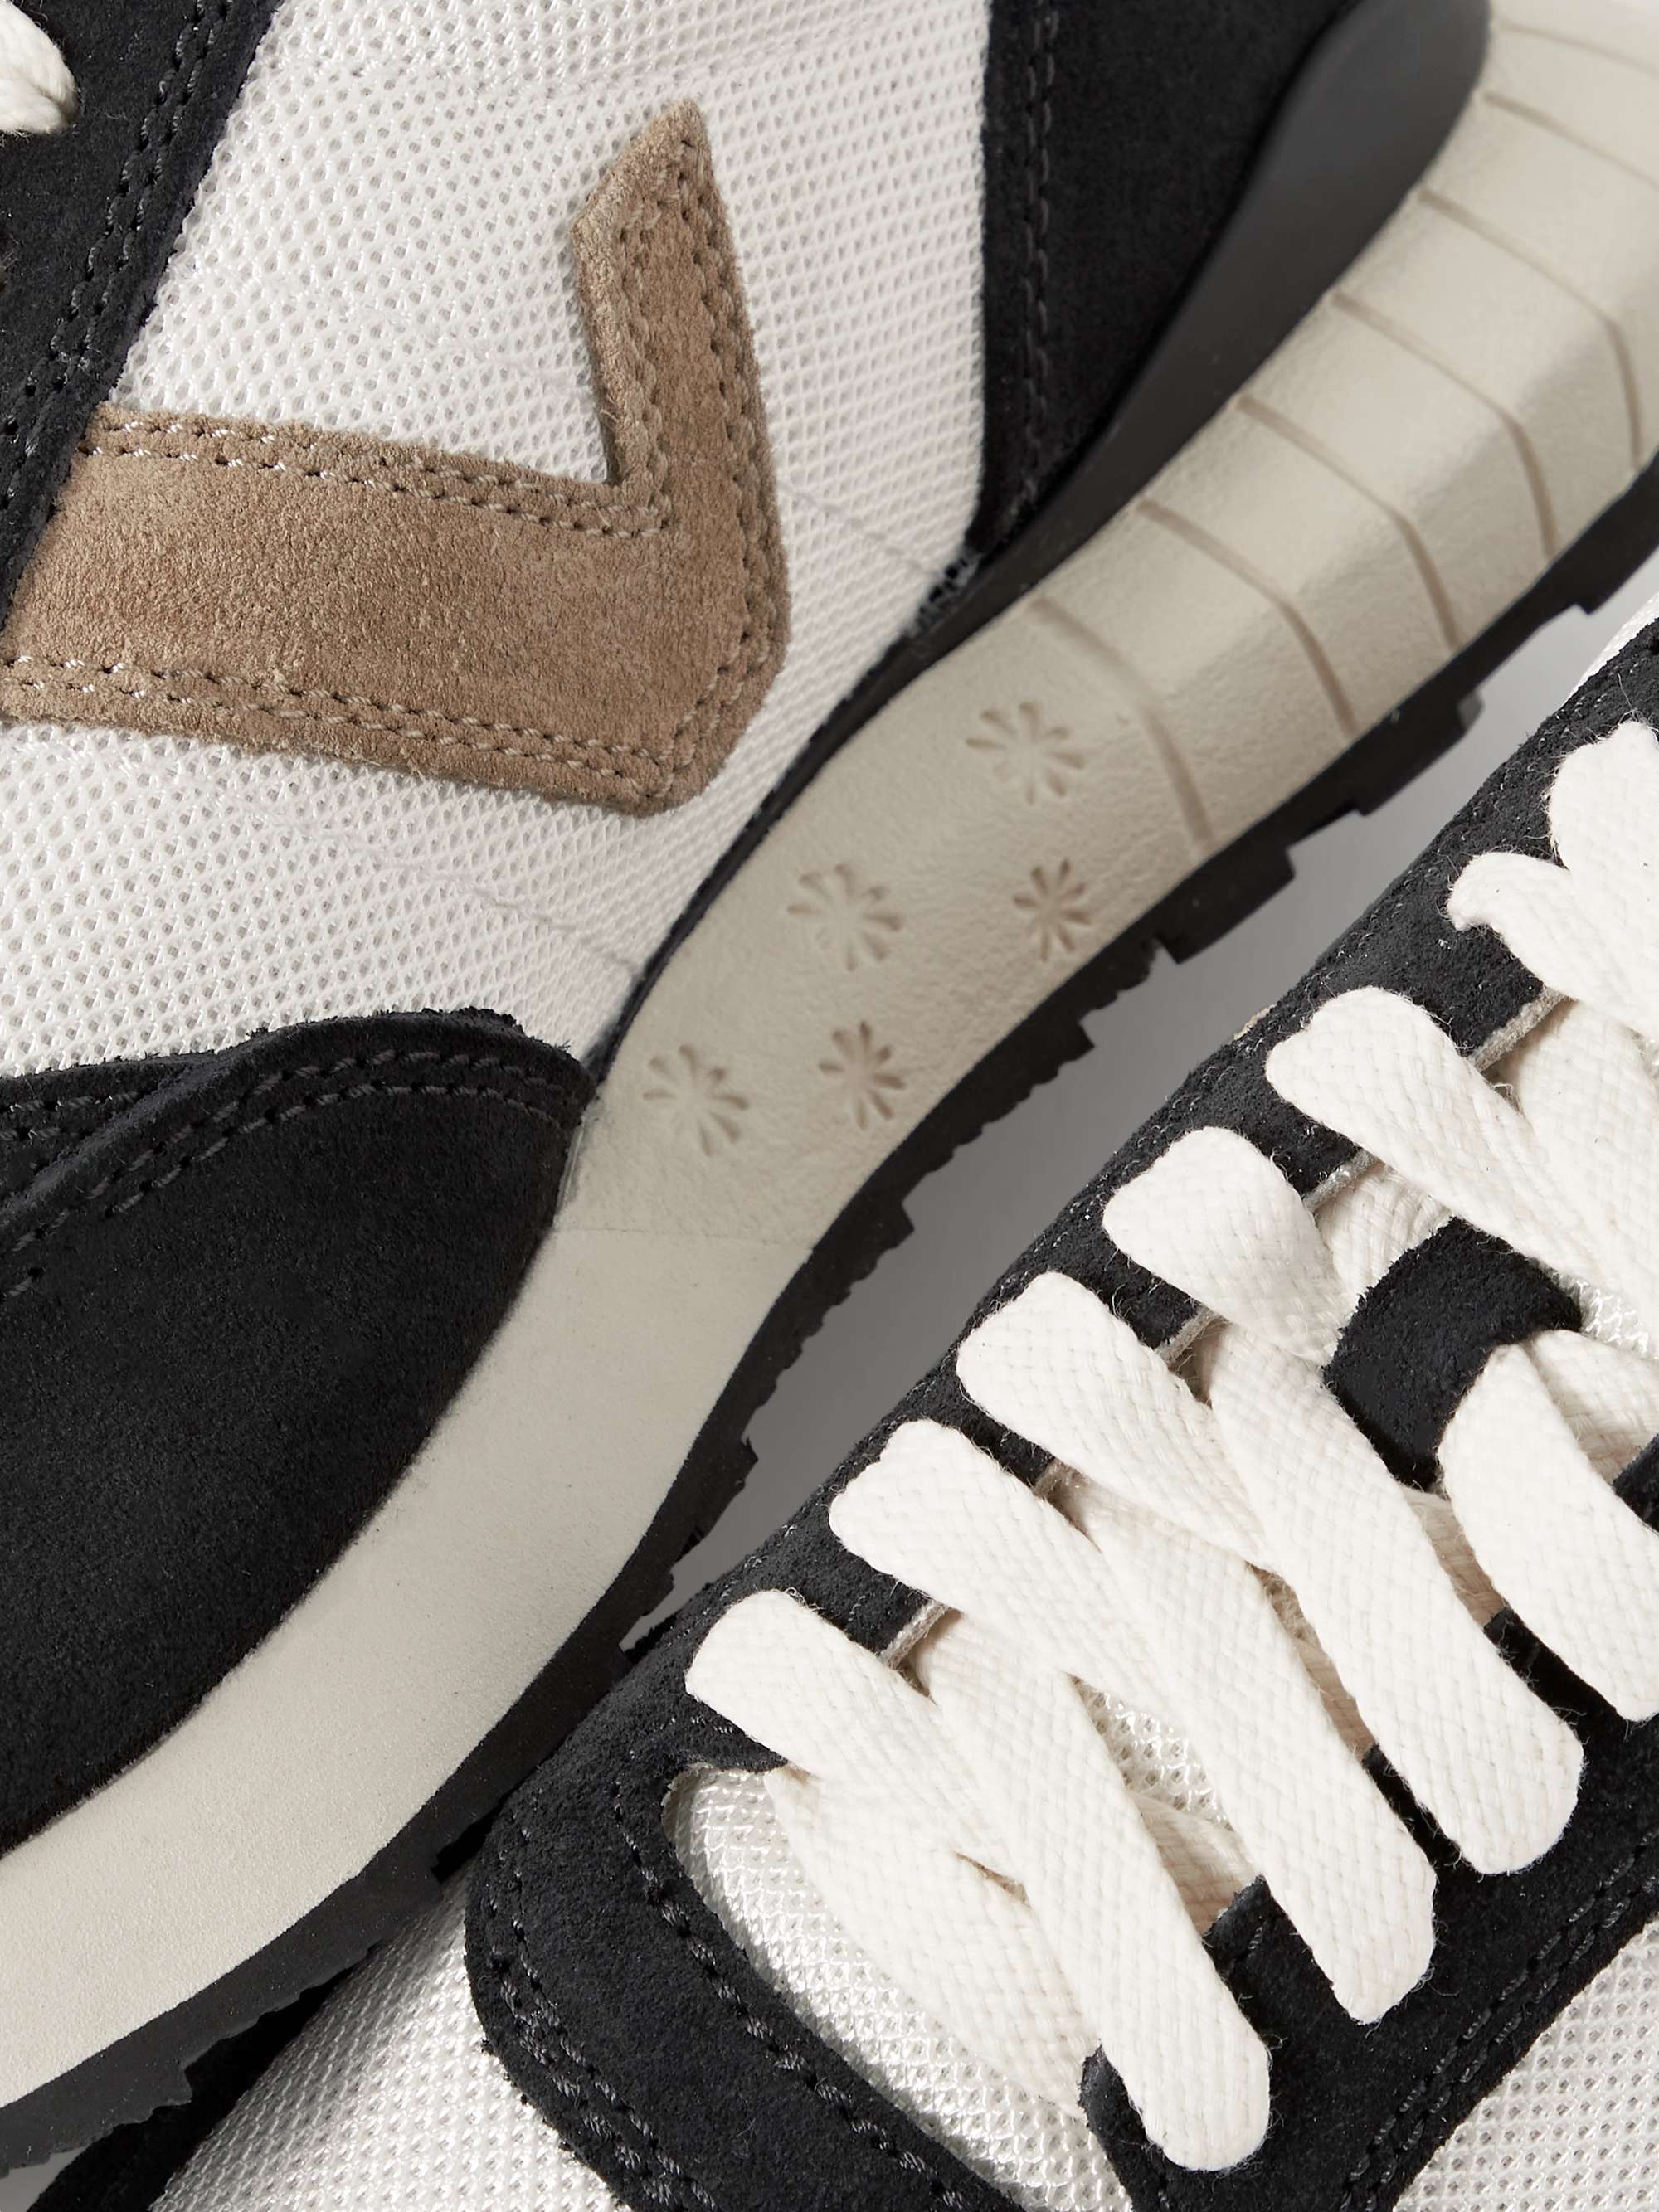 VISVIM Dunand Suede and Leather-Trimmed Mesh Sneakers